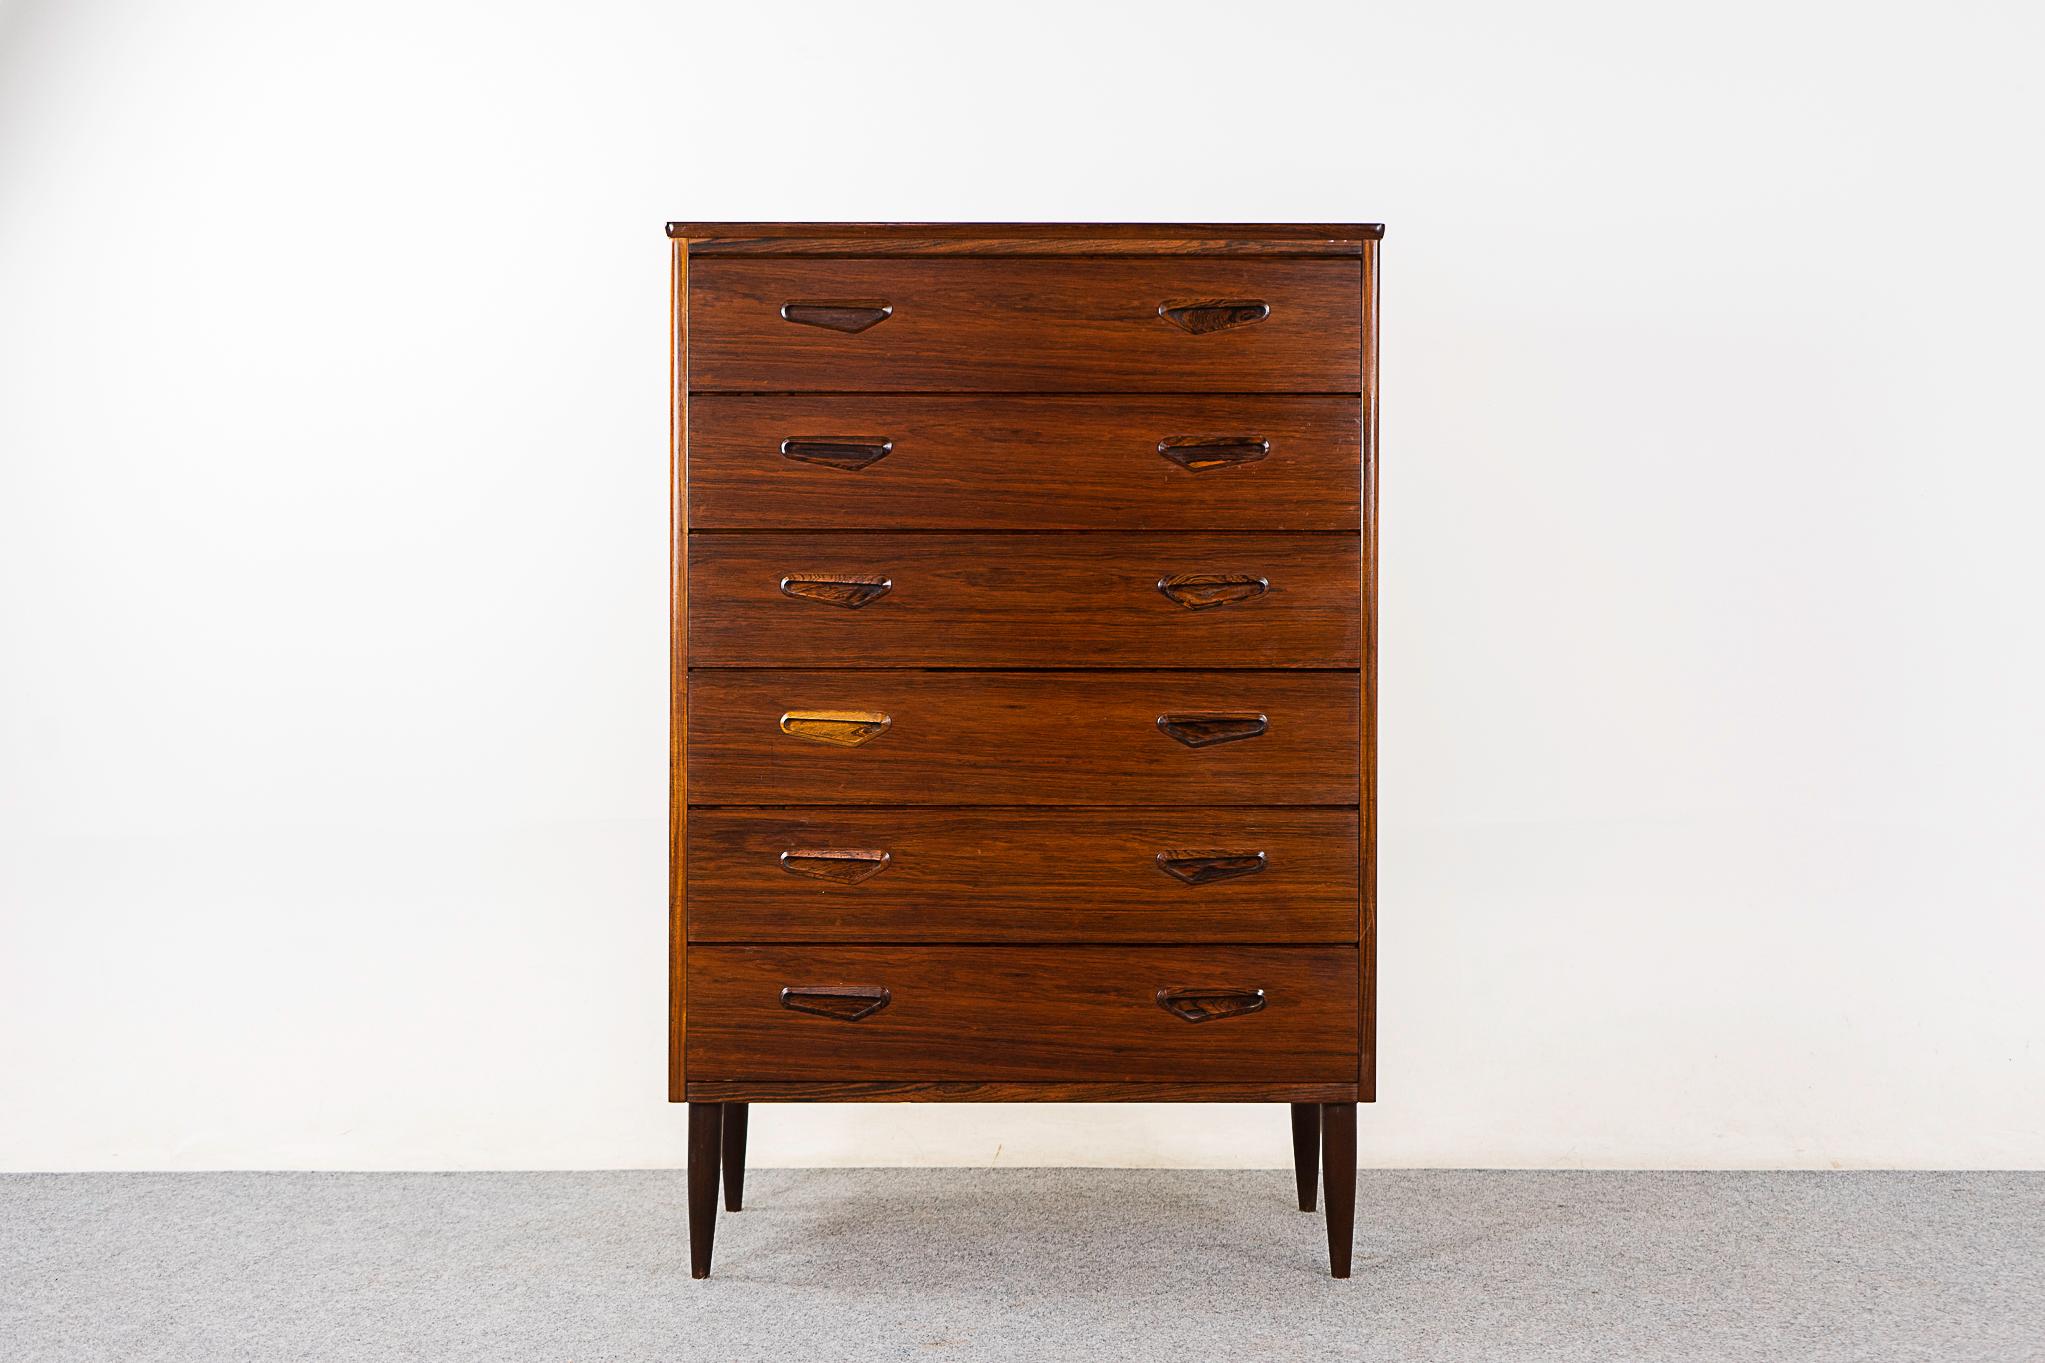 Rosewood mid-century dresser, circa 1960's. Solid wood edging with stunning book-matched veneer. Dovetail constructed drawers with stylish handles, elegant tapering legs.

Please inquire for international and remote shipping rates. 